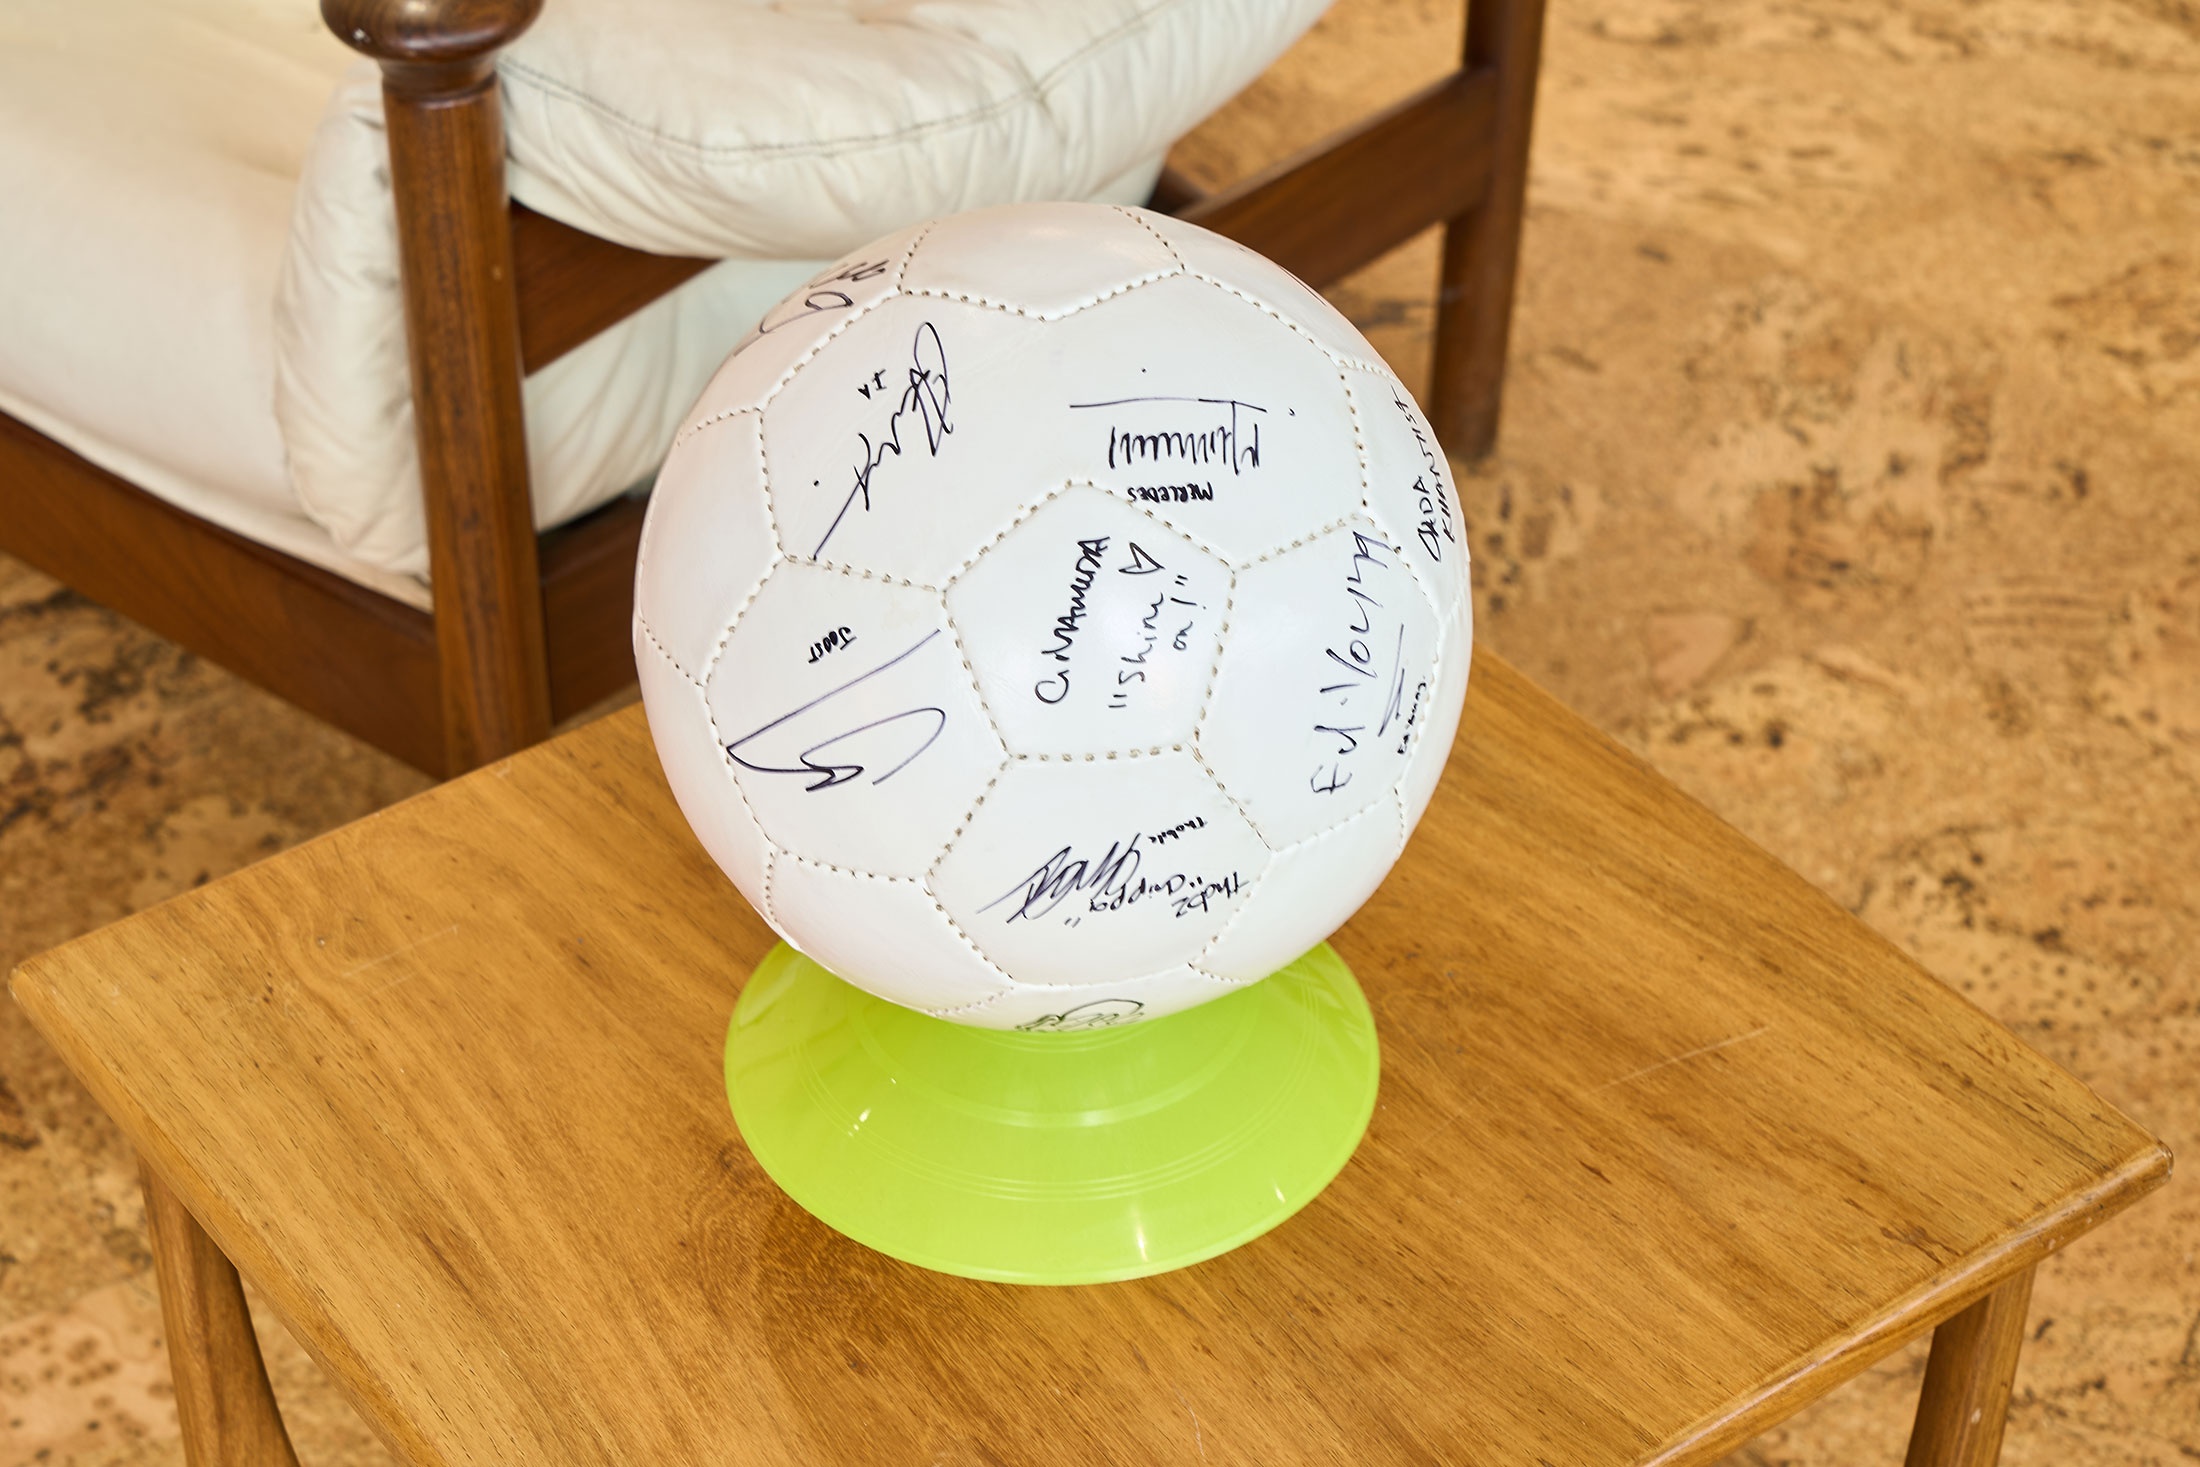 Ephemera from the 2022 rendition of ‘Exhibition Match’ on A4’s second floor. In the lounge, a signed soccer ball rests atop a plastic stand on a coffee table.
